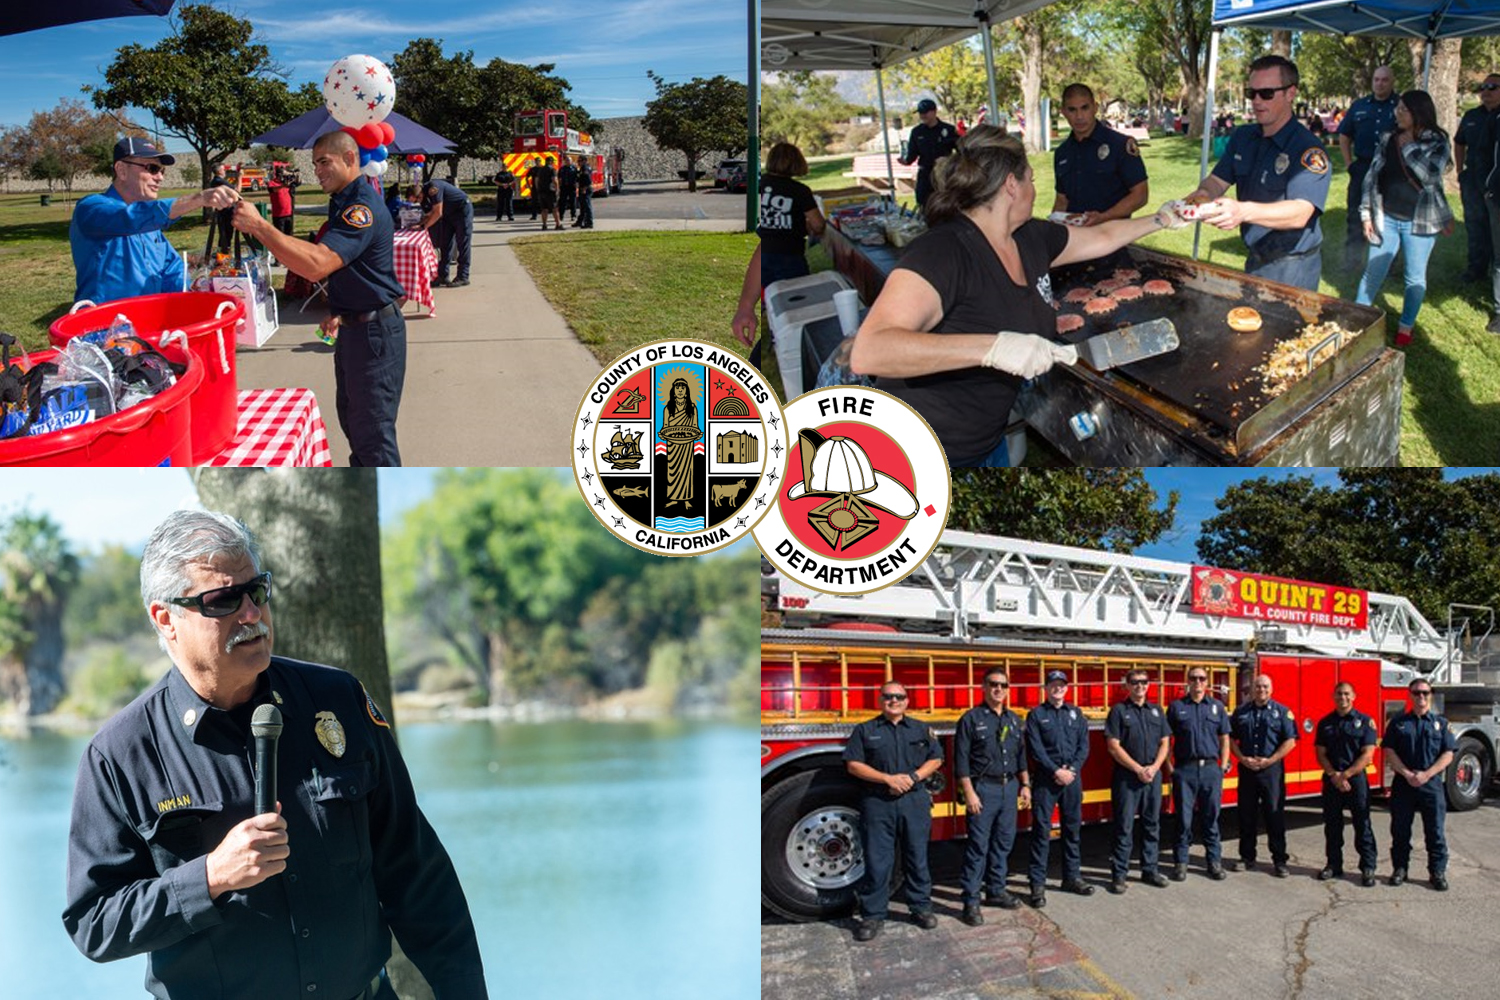 The Irwindale Chamber of Commerce held its annual 2022 First Responders Appreciation BBQ & Non-Profit Showcase on Thursday, November 17, 2022, at the Santa Fe Dam Recreation Area in the City of Irwindale.